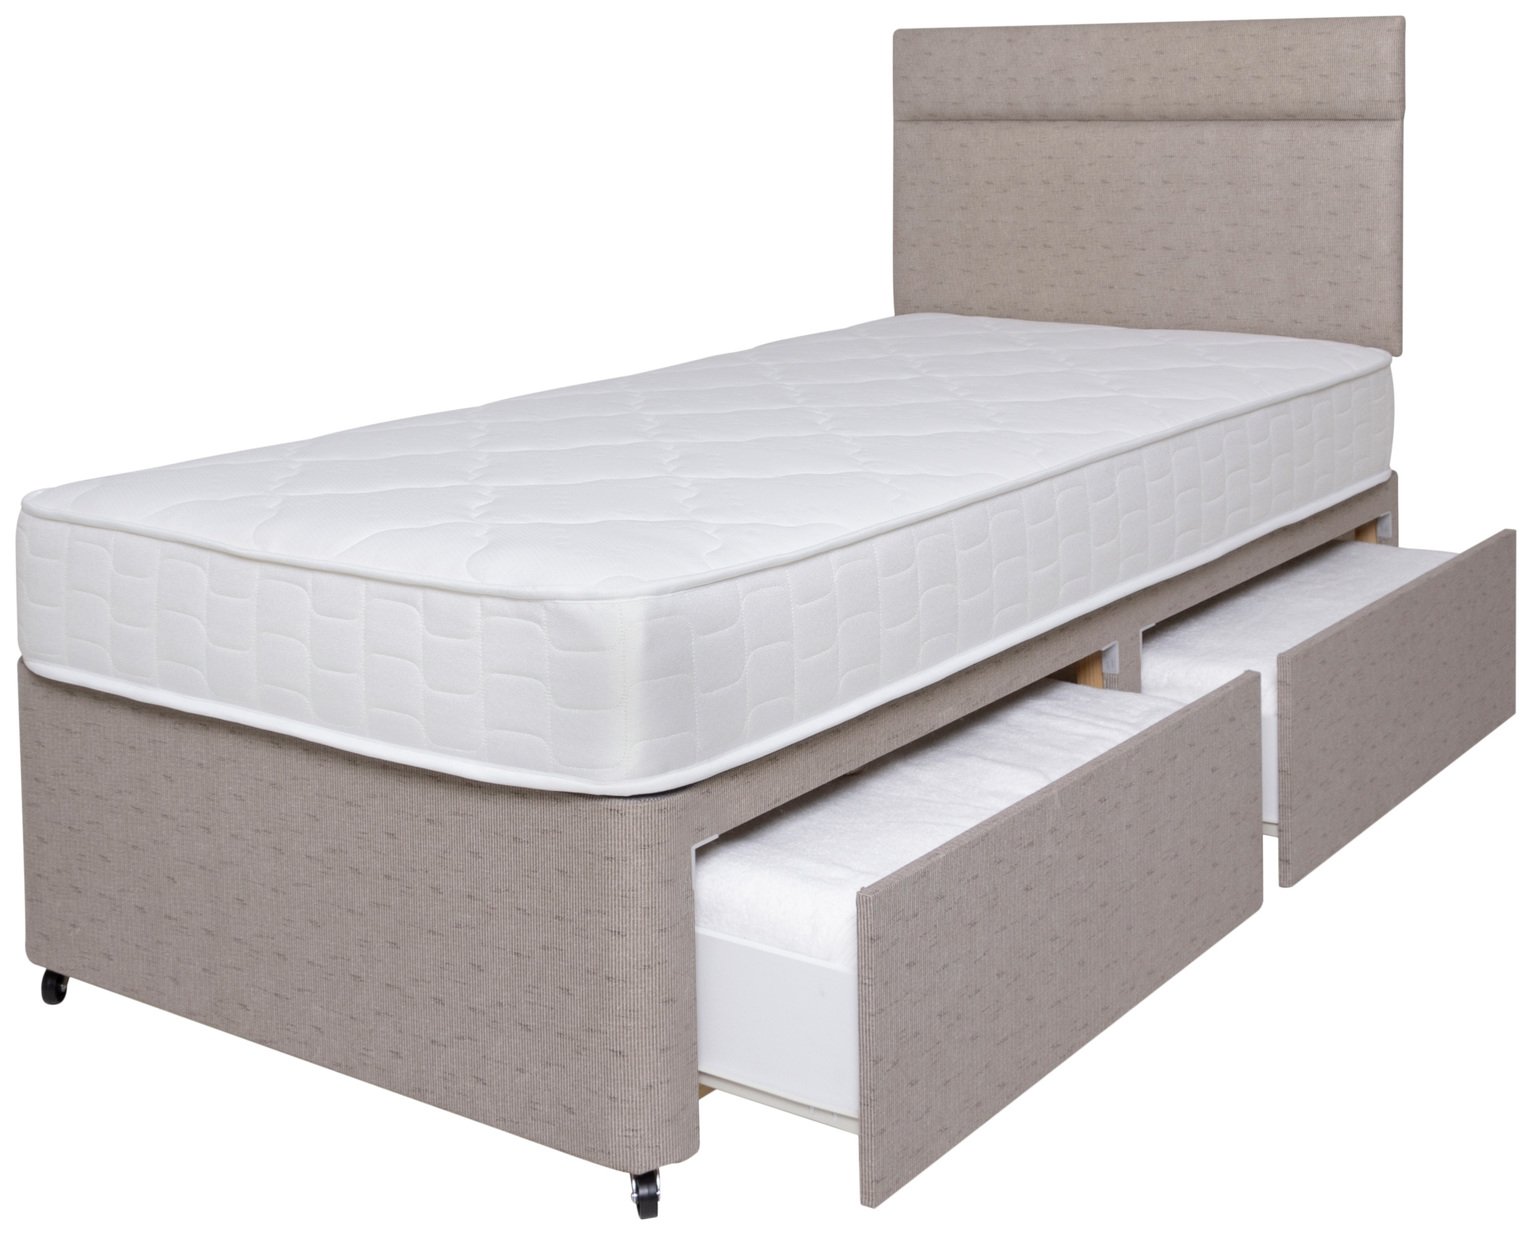 airsprung penrose ortho memory double mattress review